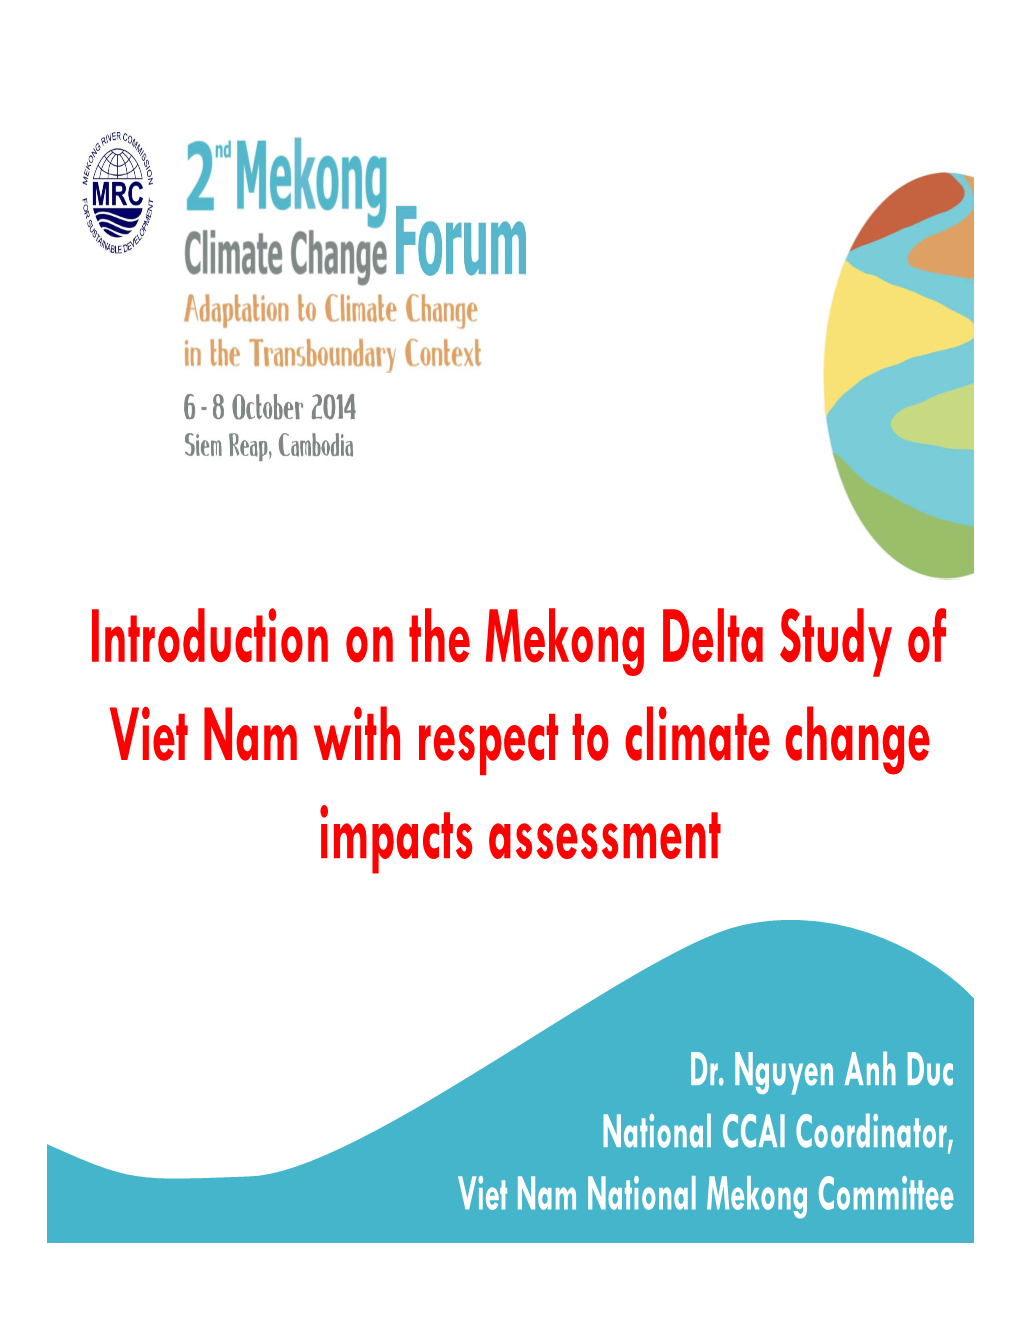 Introduction on the Mekong Delta Study of Viet Nam with Respect to Climate Change Impacts Assessment